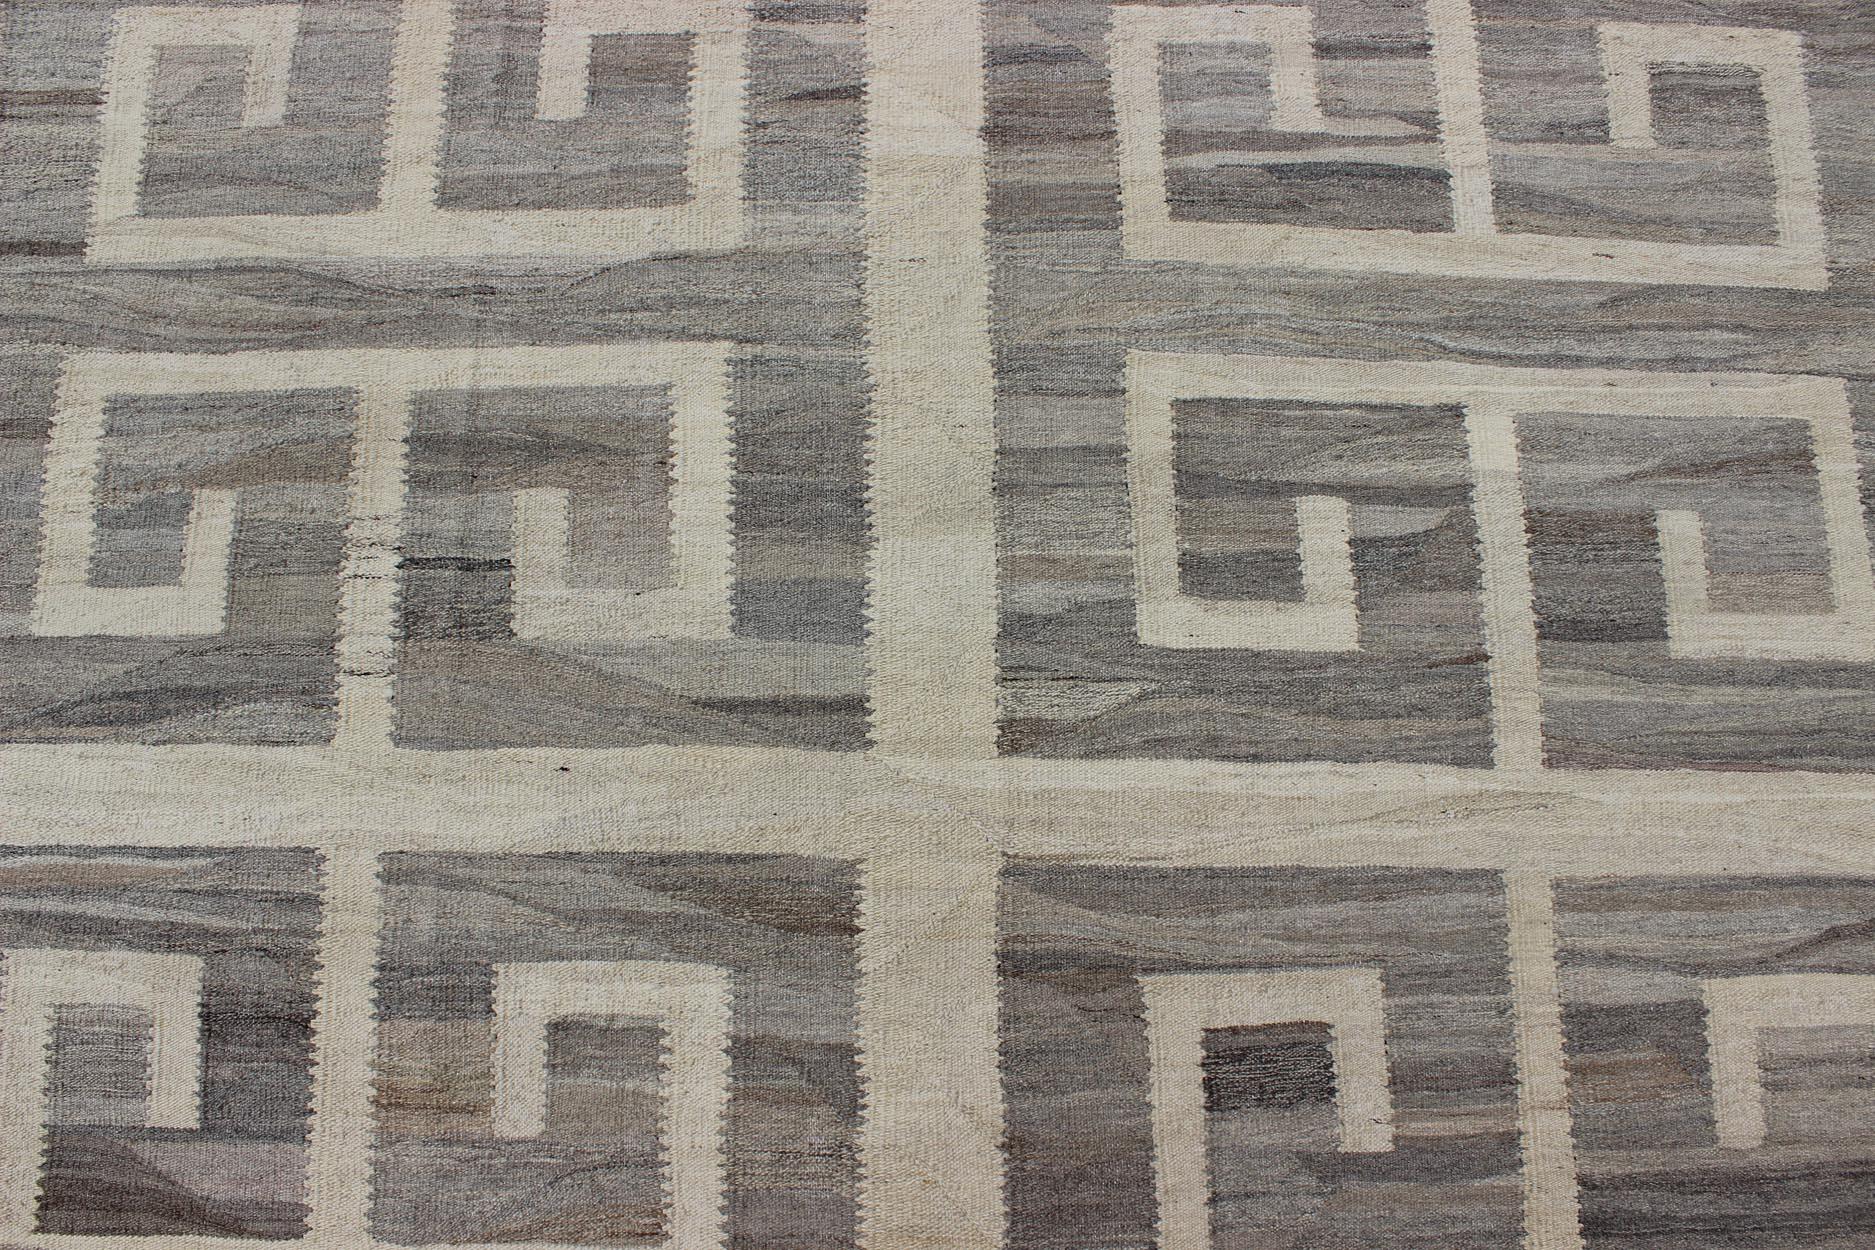 Oversized Modern Kilim with Large Scale Greek Key Design in Cream & Gray Tones For Sale 2